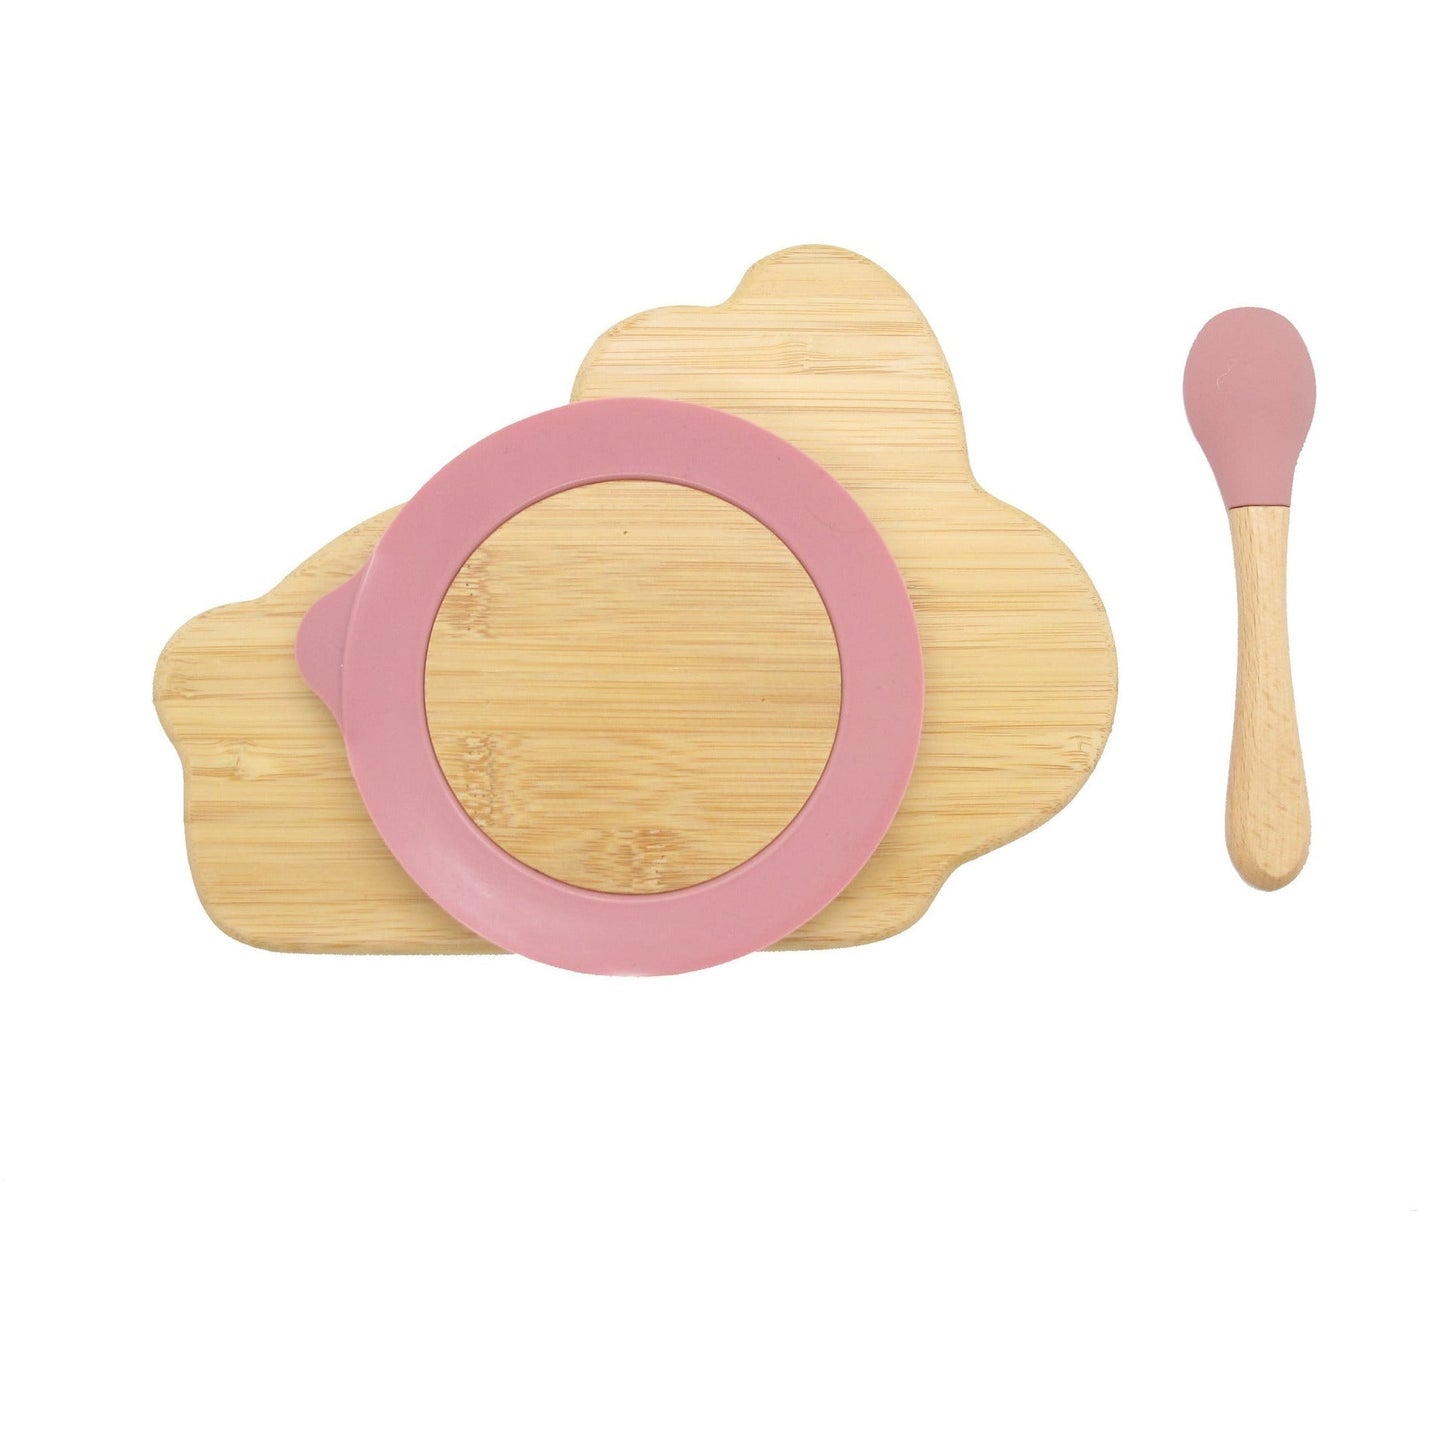 Bamboo Rabbit Kids Plate with Suction Cap Base & Spoon - Little Kids Business